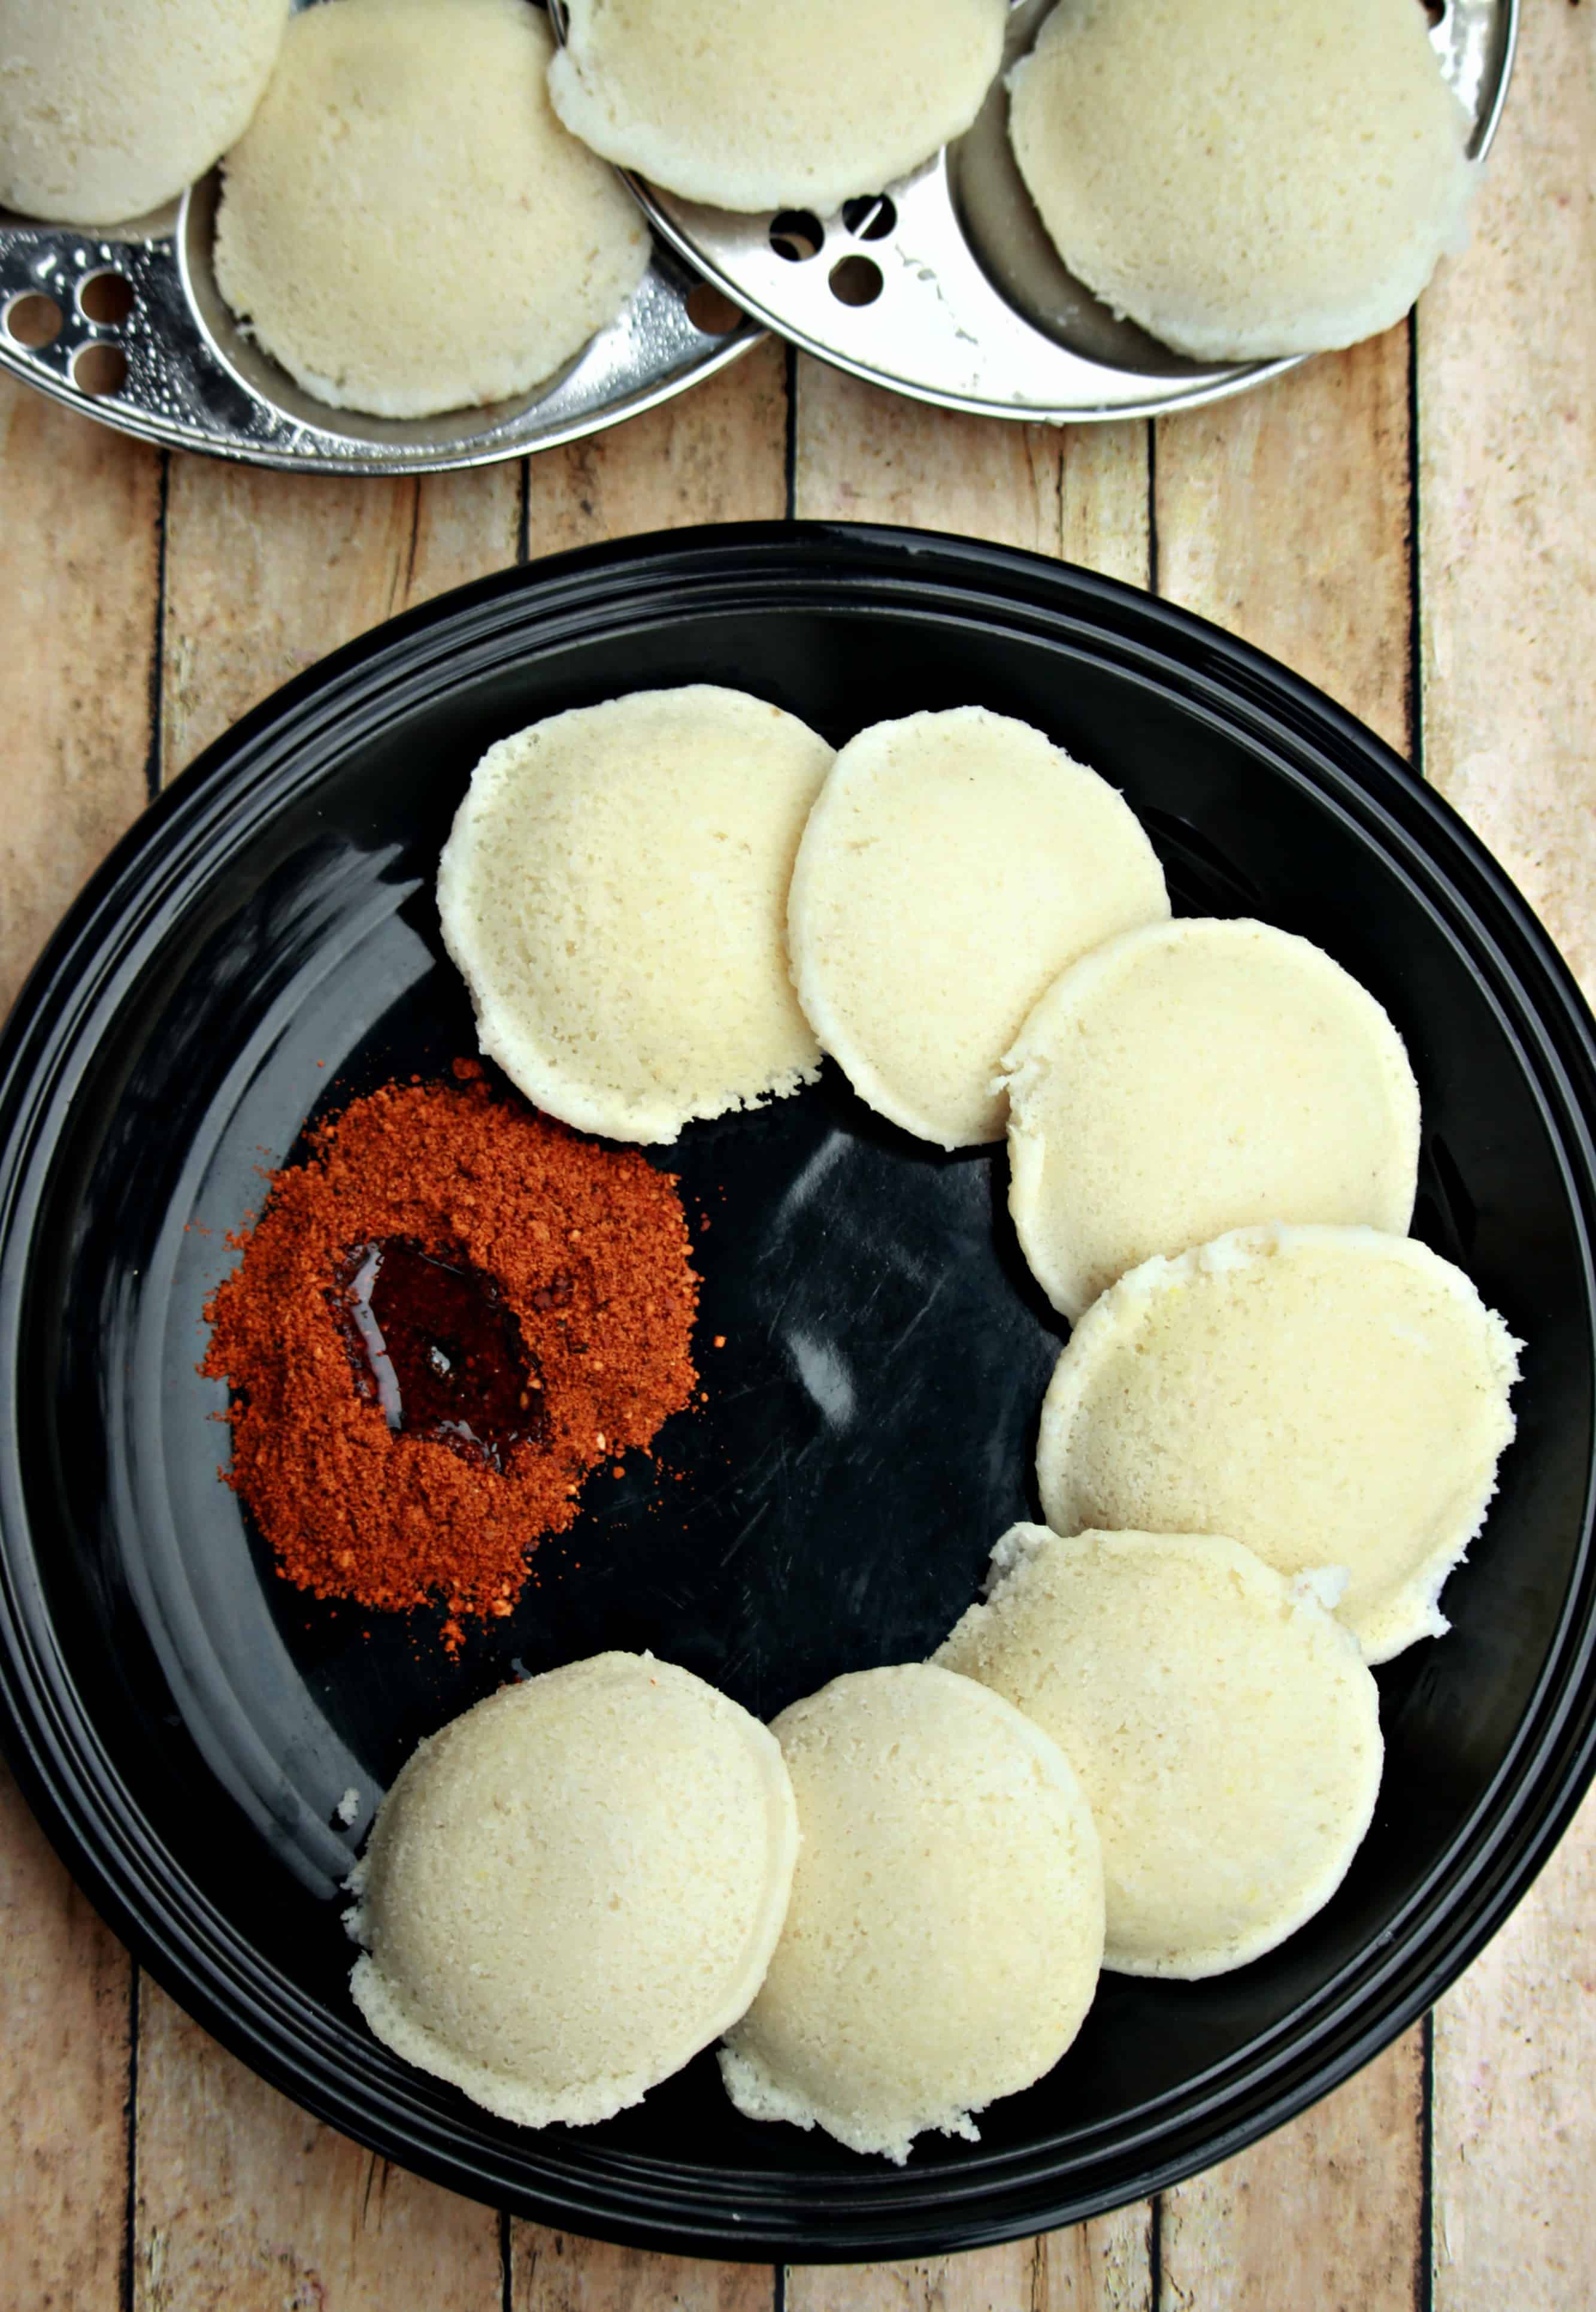 Vegan and Gluten Free Idli is ready to eat.